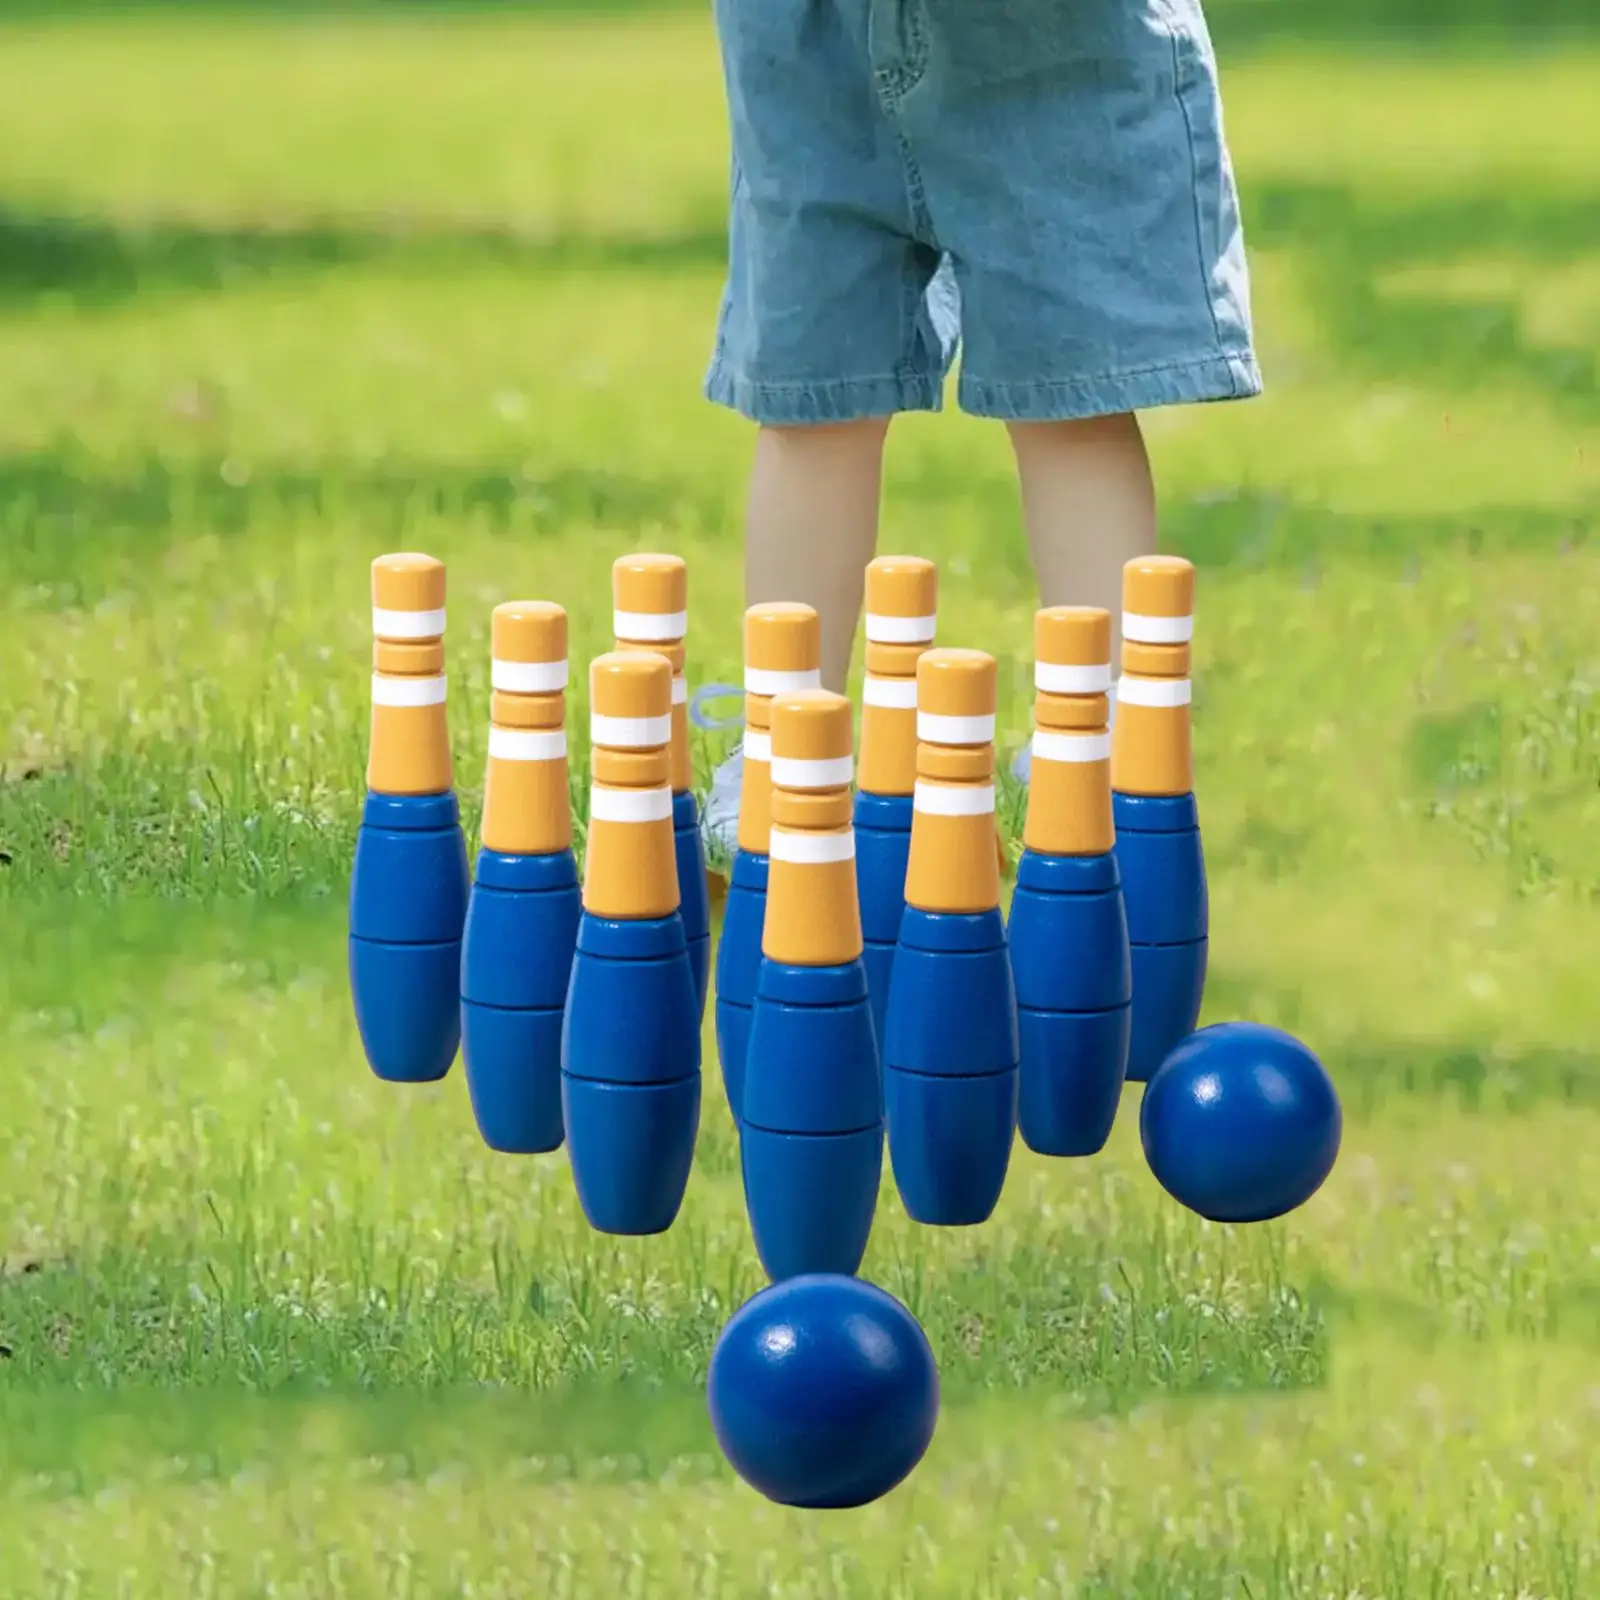 Wooden Bowling Set Backyard Games Play Balls Outdoor Children`s Bowling Toys Bowling Game Props for Lawn Garden Birthday Gift